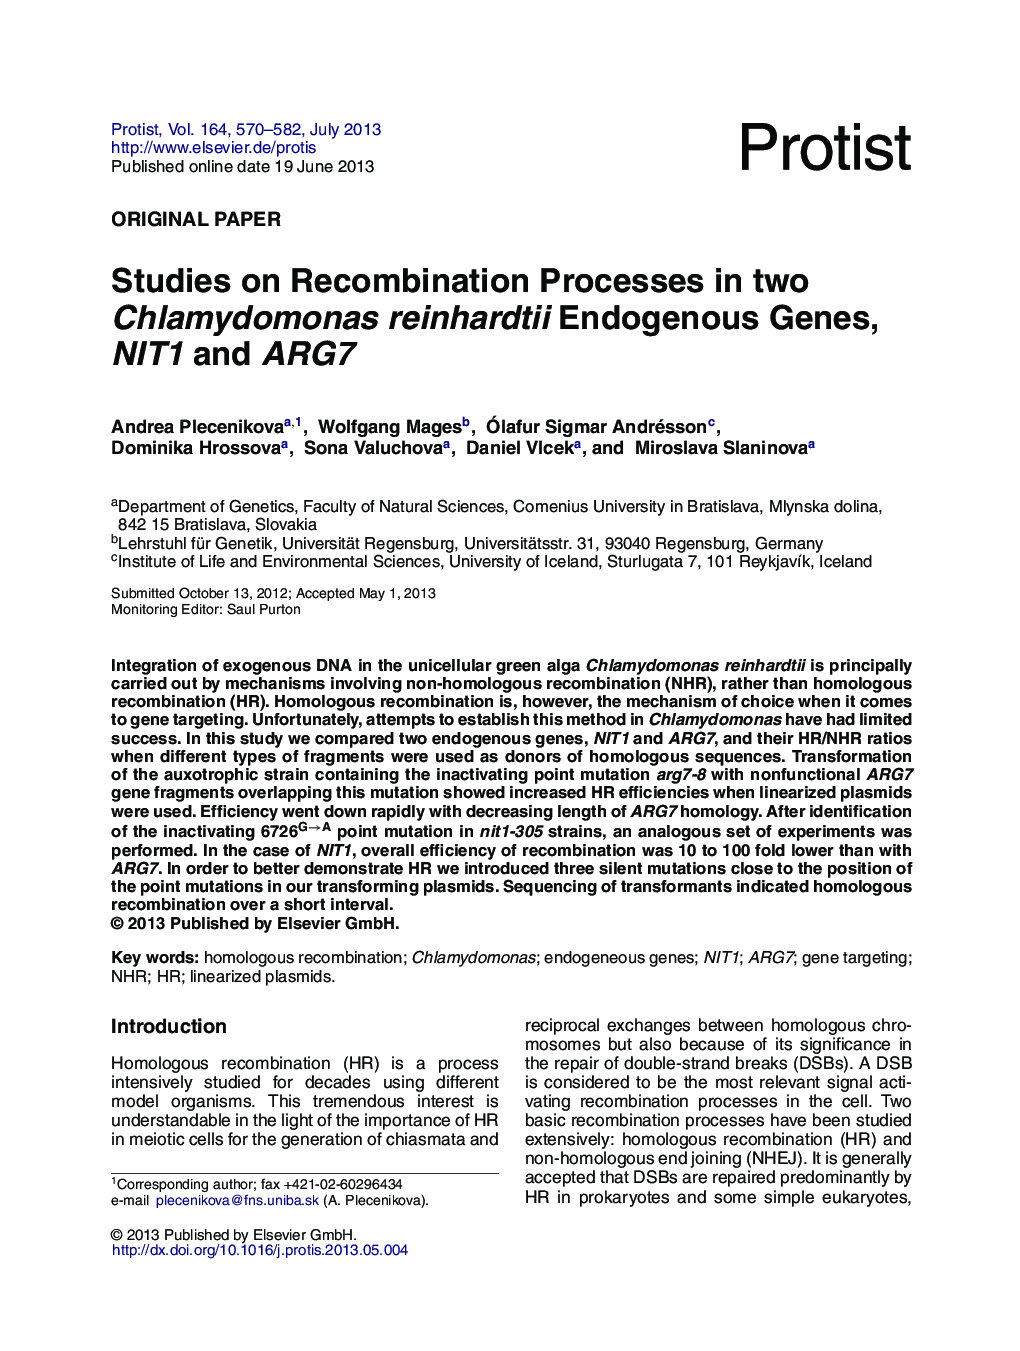 Studies on Recombination Processes in two Chlamydomonas reinhardtii Endogenous Genes, NIT1 and ARG7